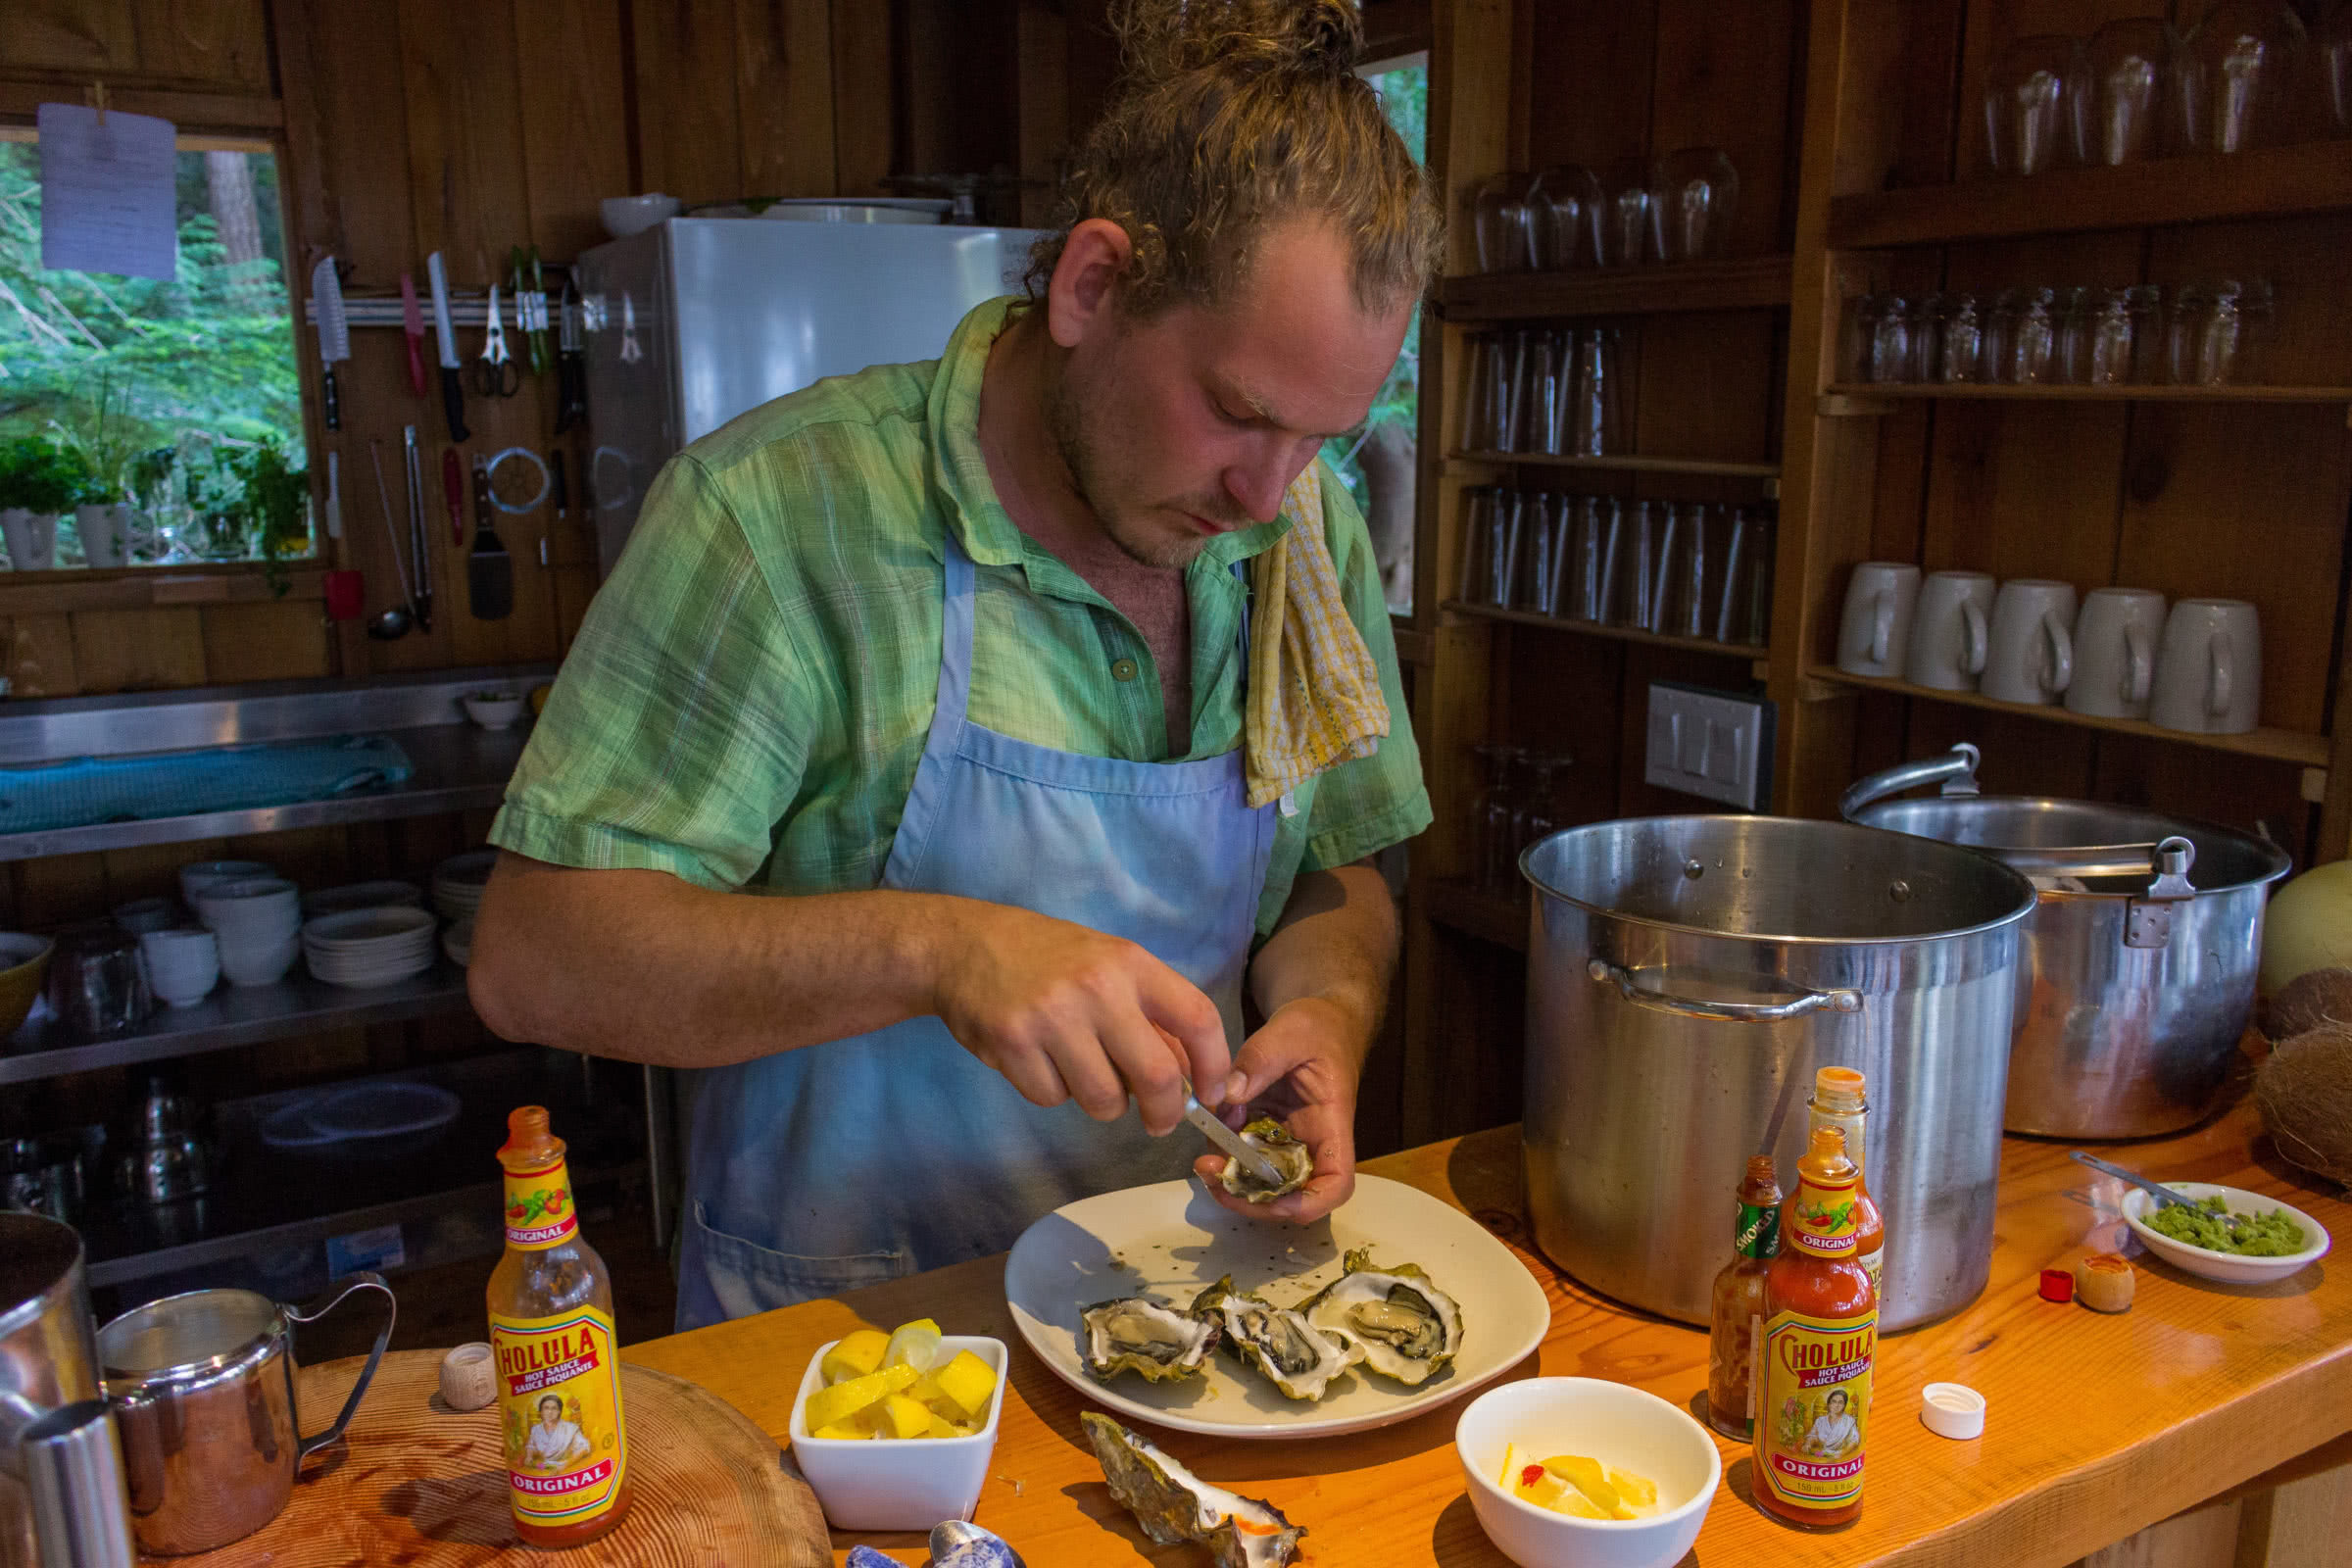 Our cook serving fresh oysters at the Cabana Cafe at the off-grid eco resort